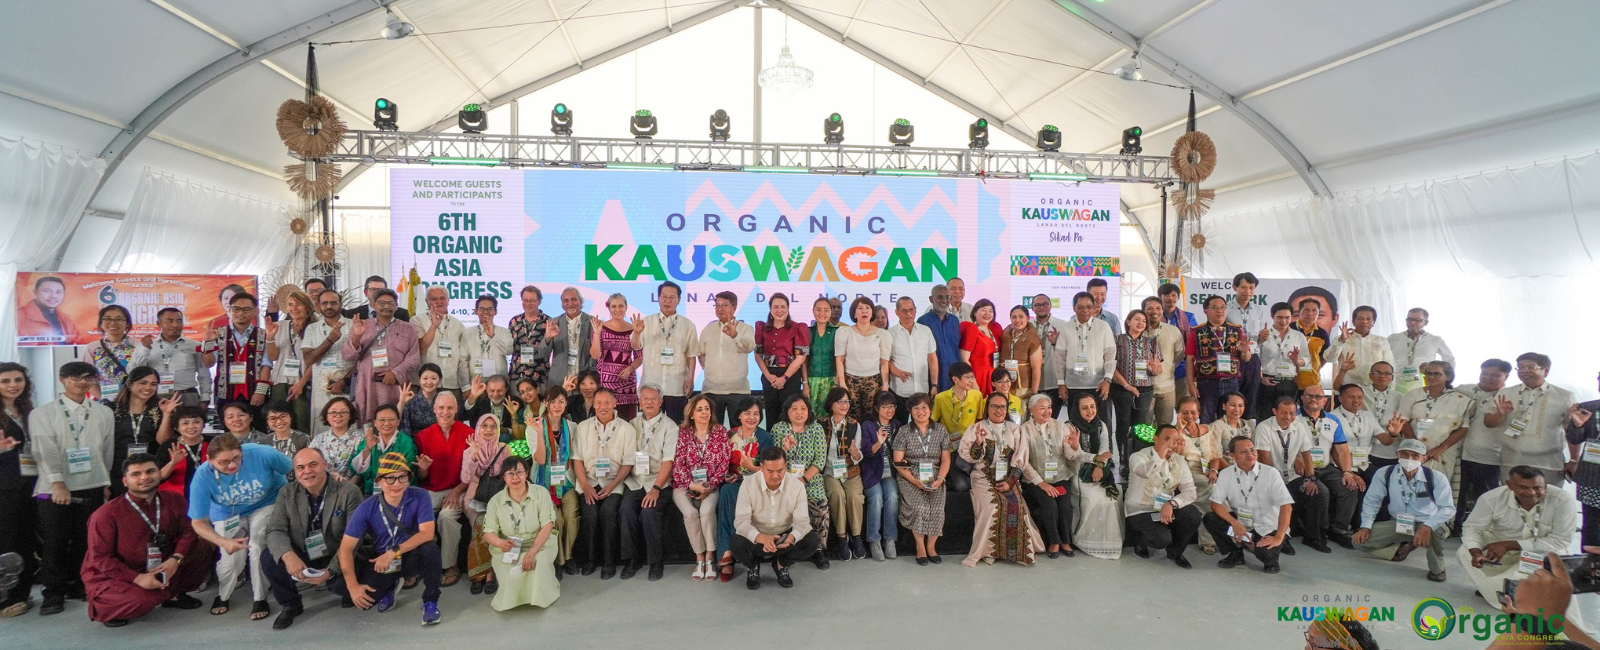 My Unforgettable Experience at the Organic Asia Congress!